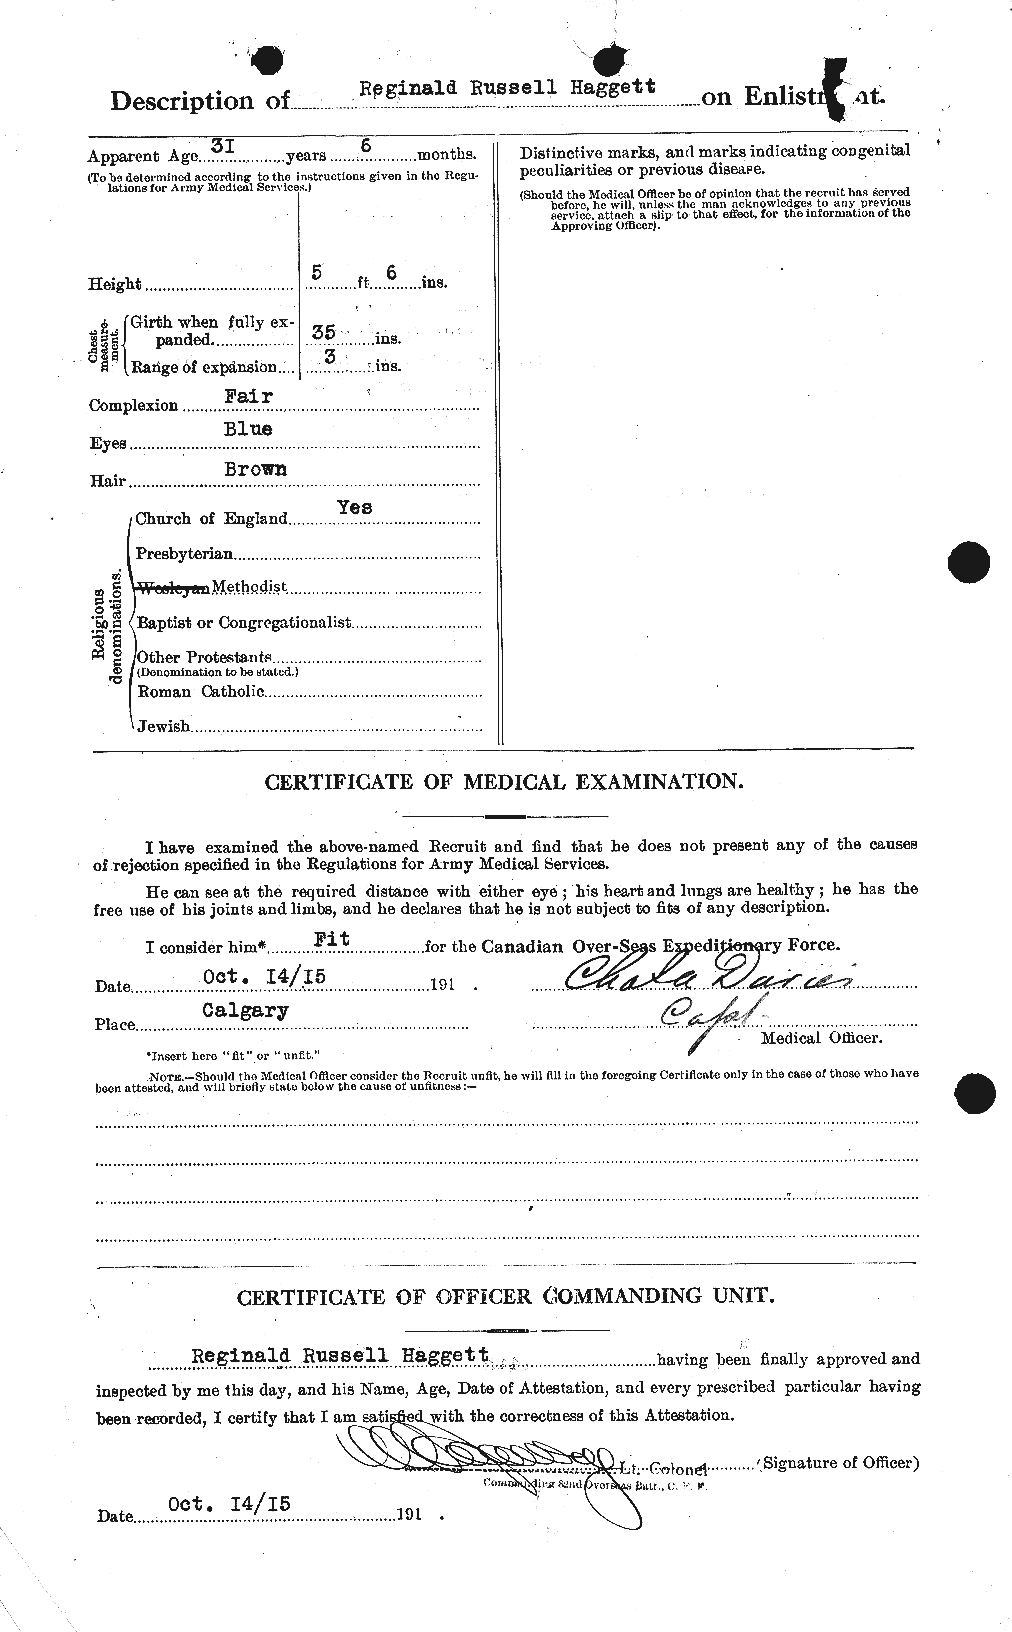 Personnel Records of the First World War - CEF 366707b